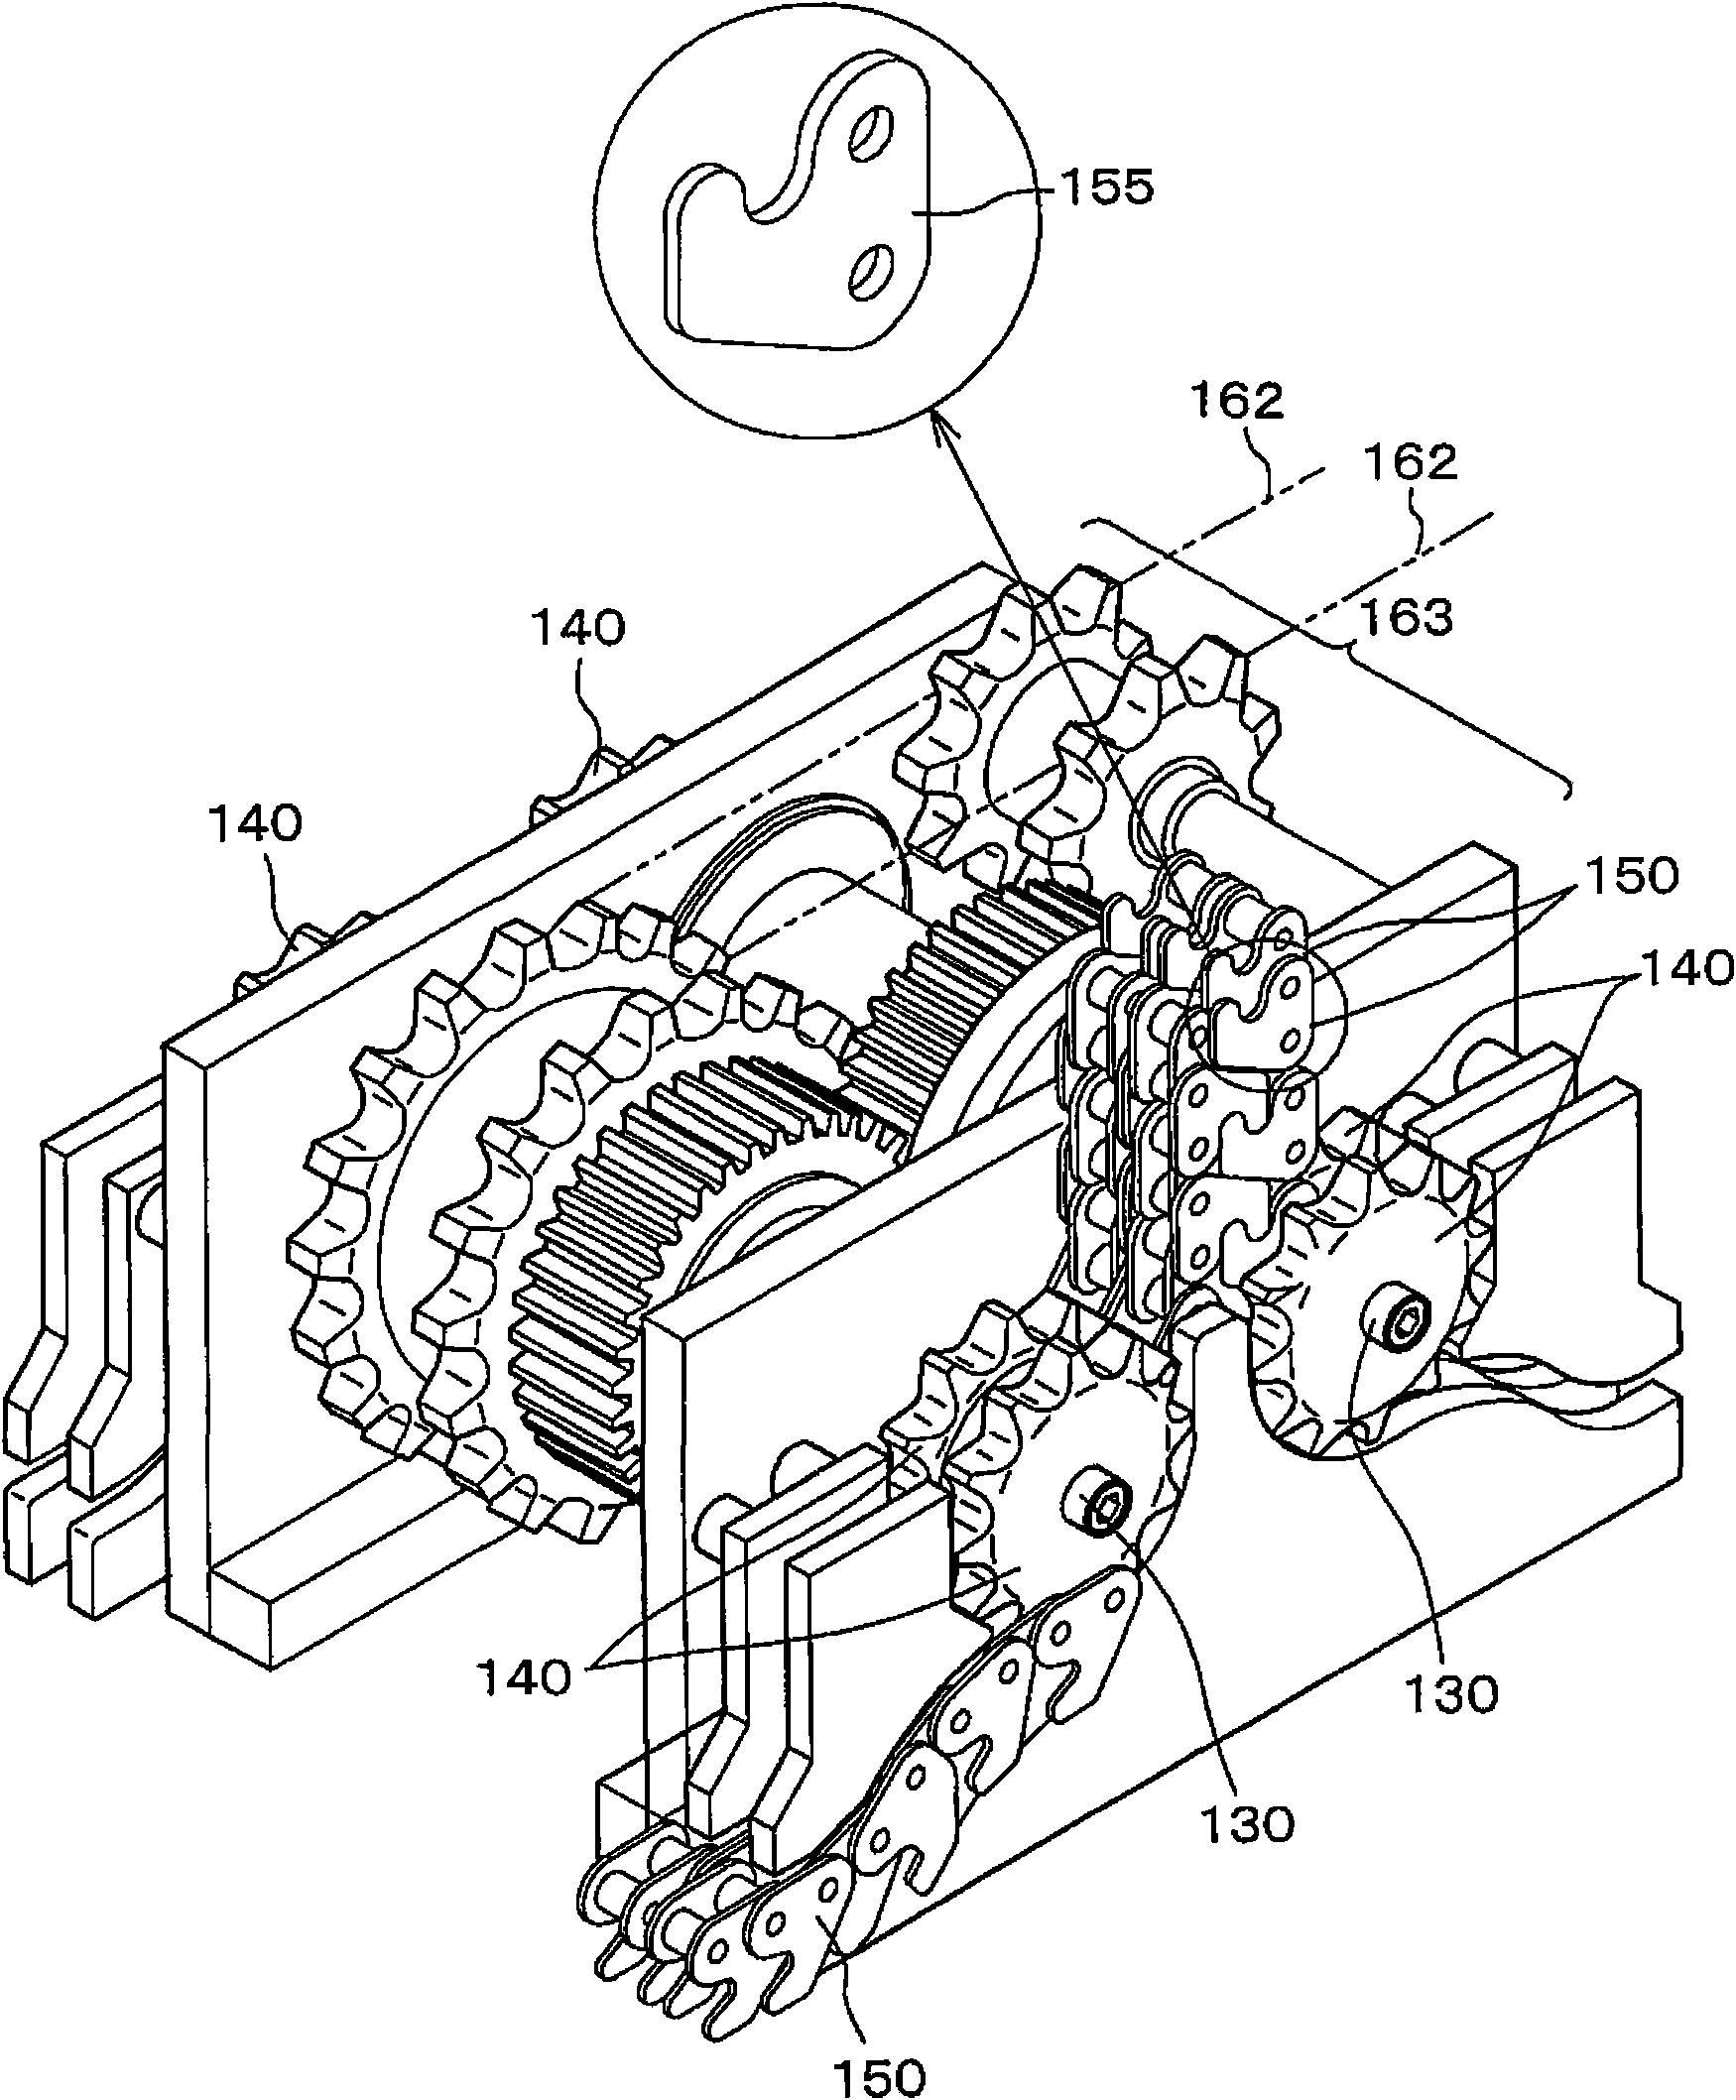 Engagement chain type driving device